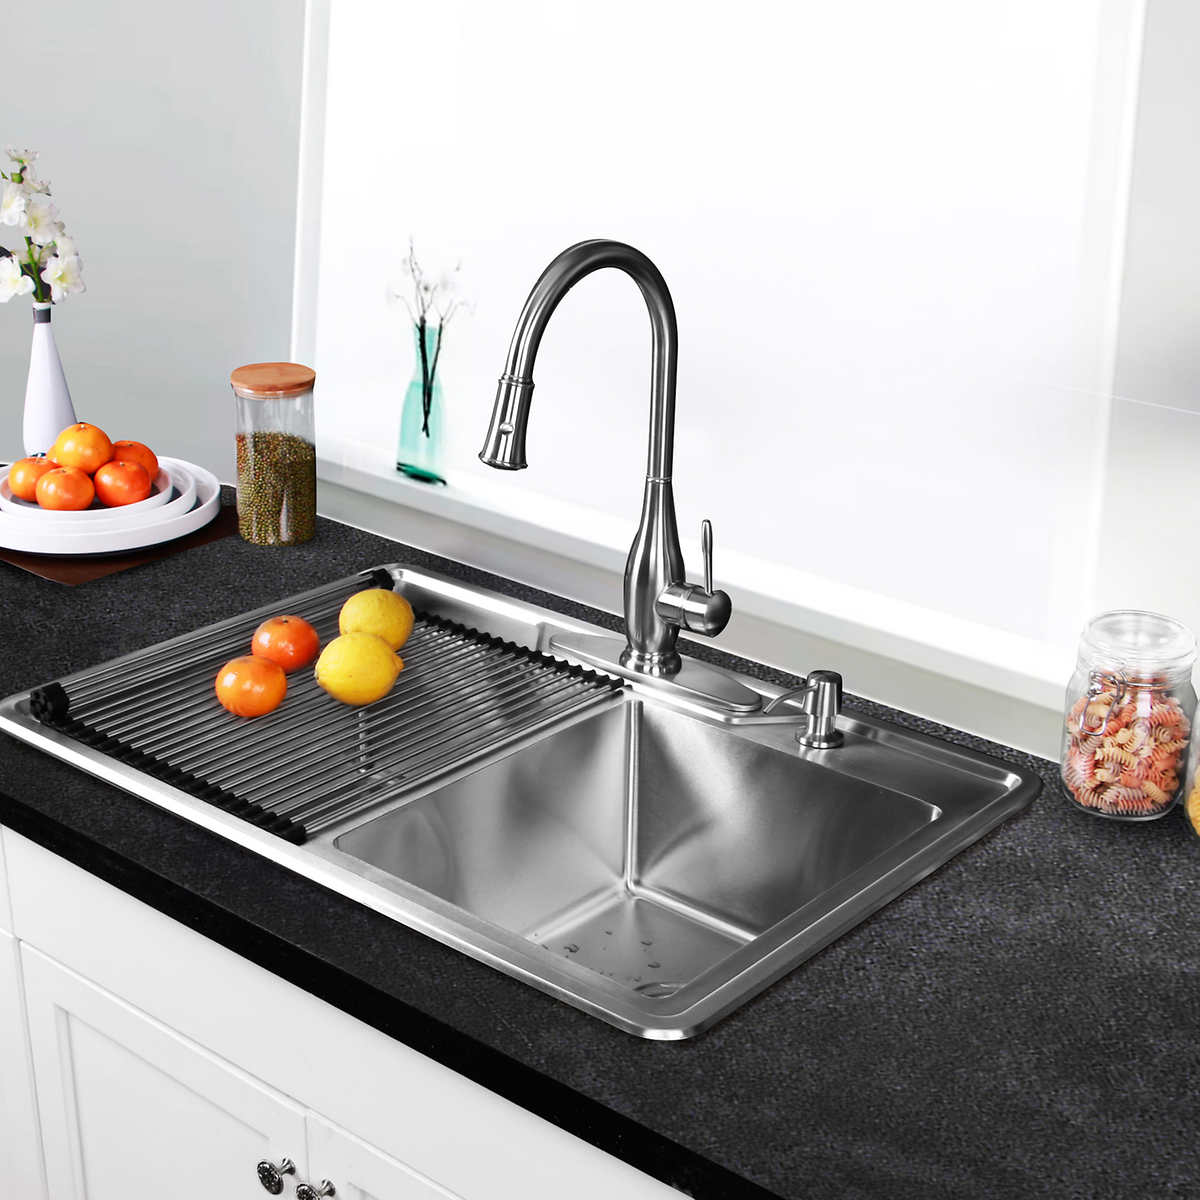 AFA 33 Stainless Steel Double Bowl Sink With Pull Down Faucet